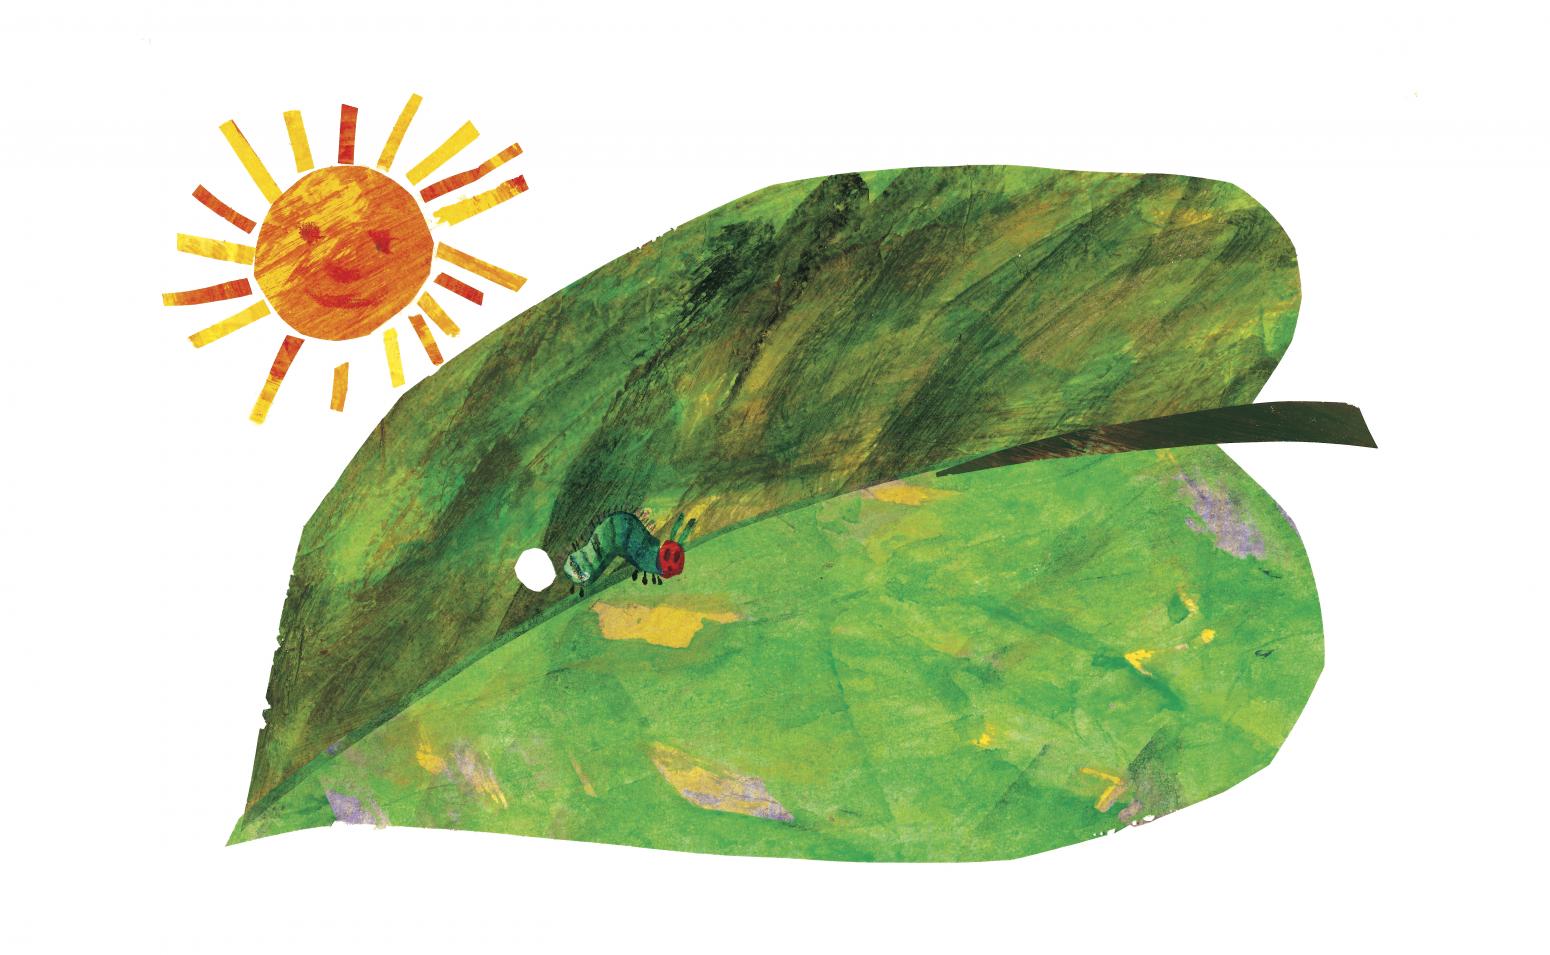 Illustration of caterpillar on leaf with hole punched out of leaf. 